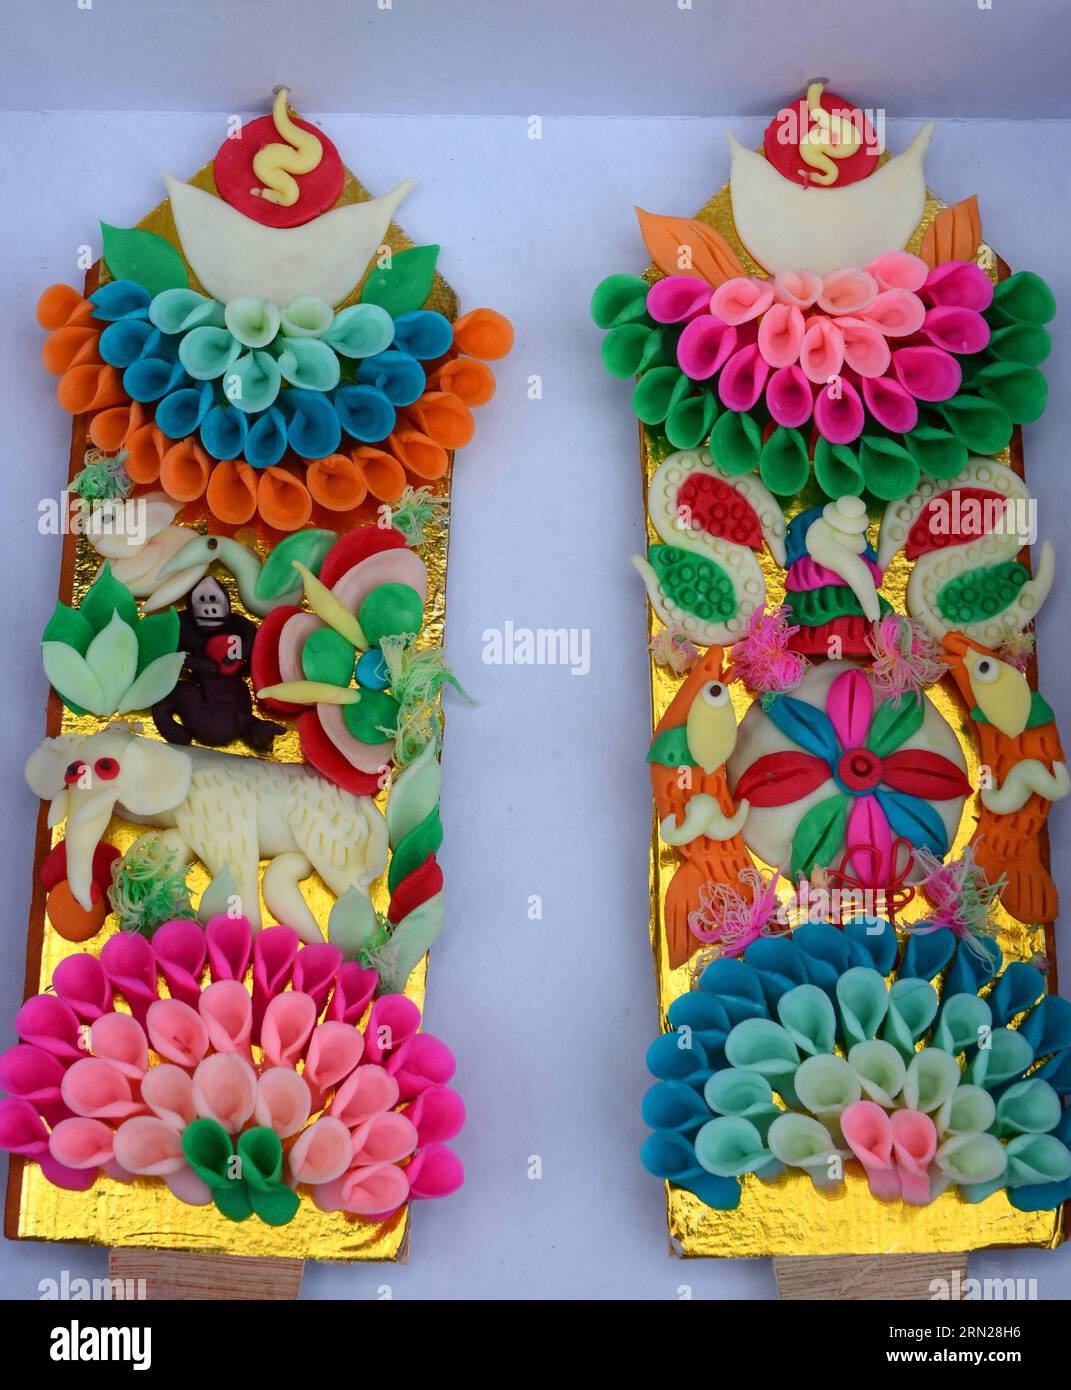 (150217) -- LHASA, Feb. 17, 2015 -- Photo taken on Feb. 17, 2015 shows butter sculptures for sale in Lhasa, capital of southwest China s Tibet Autonomous Region. Tibetan people were busy with purchasing goods for the coming Tibetan New Year or Losar, which happens to fall on Feb. 19, the same day with Chinese Lunar New Year. ) (lfj) CHINA-LHASA-LOSAR-GOODS (CN) Chogo PUBLICATIONxNOTxINxCHN   Lhasa Feb 17 2015 Photo Taken ON Feb 17 2015 Shows Butter Sculptures for Sale in Lhasa Capital of Southwest China S Tibet Autonomous Region Tibetan Celebrities Were Busy With Purchasing Goods for The Comin Stock Photo